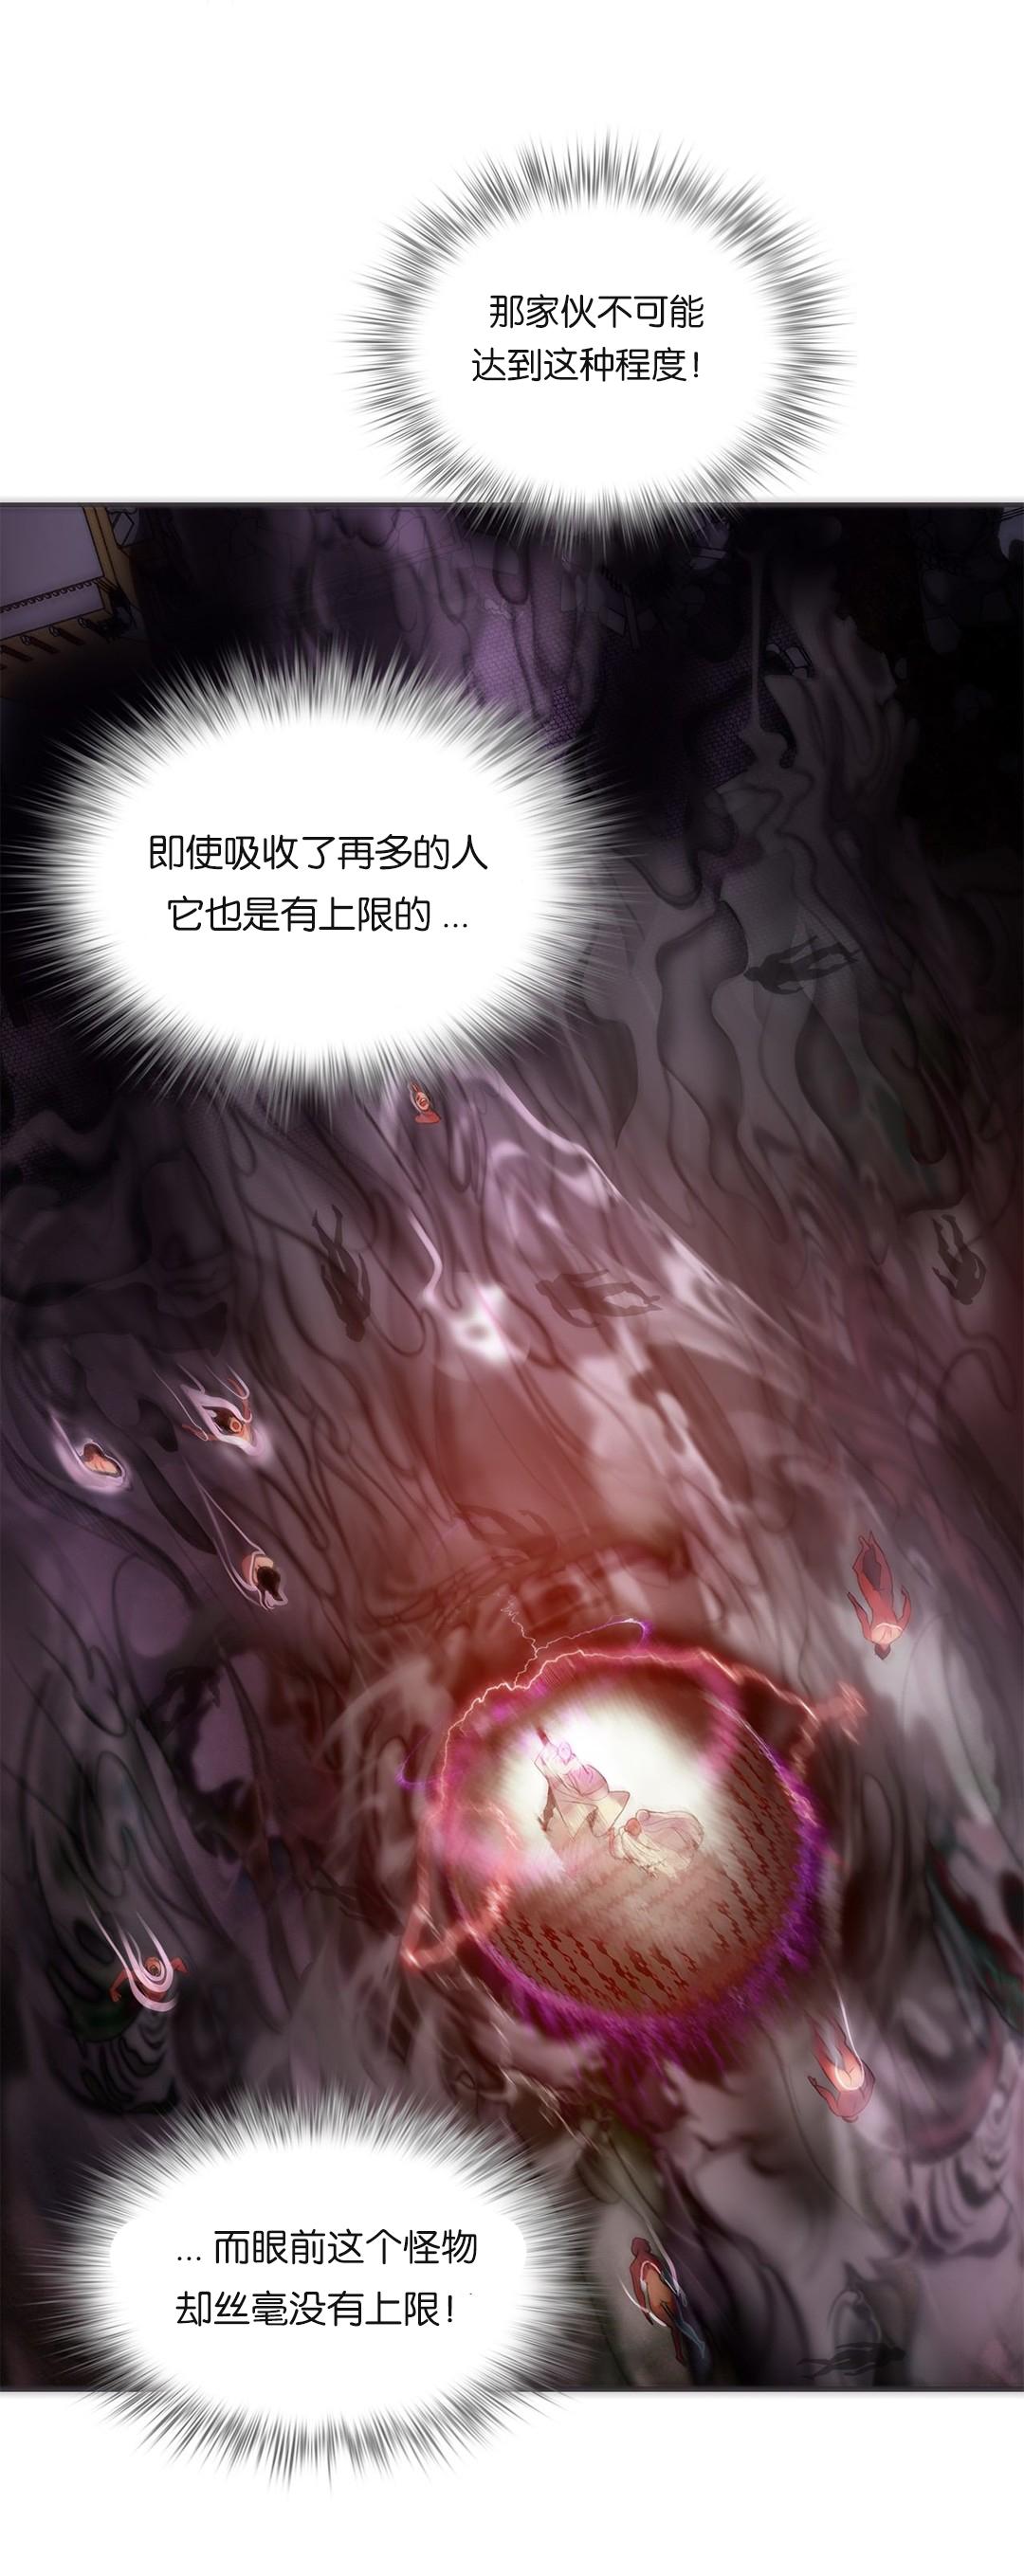 [Juder] Lilith`s Cord (第二季) Ch.61-66 [Chinese] [aaatwist个人汉化] [Ongoing] 21